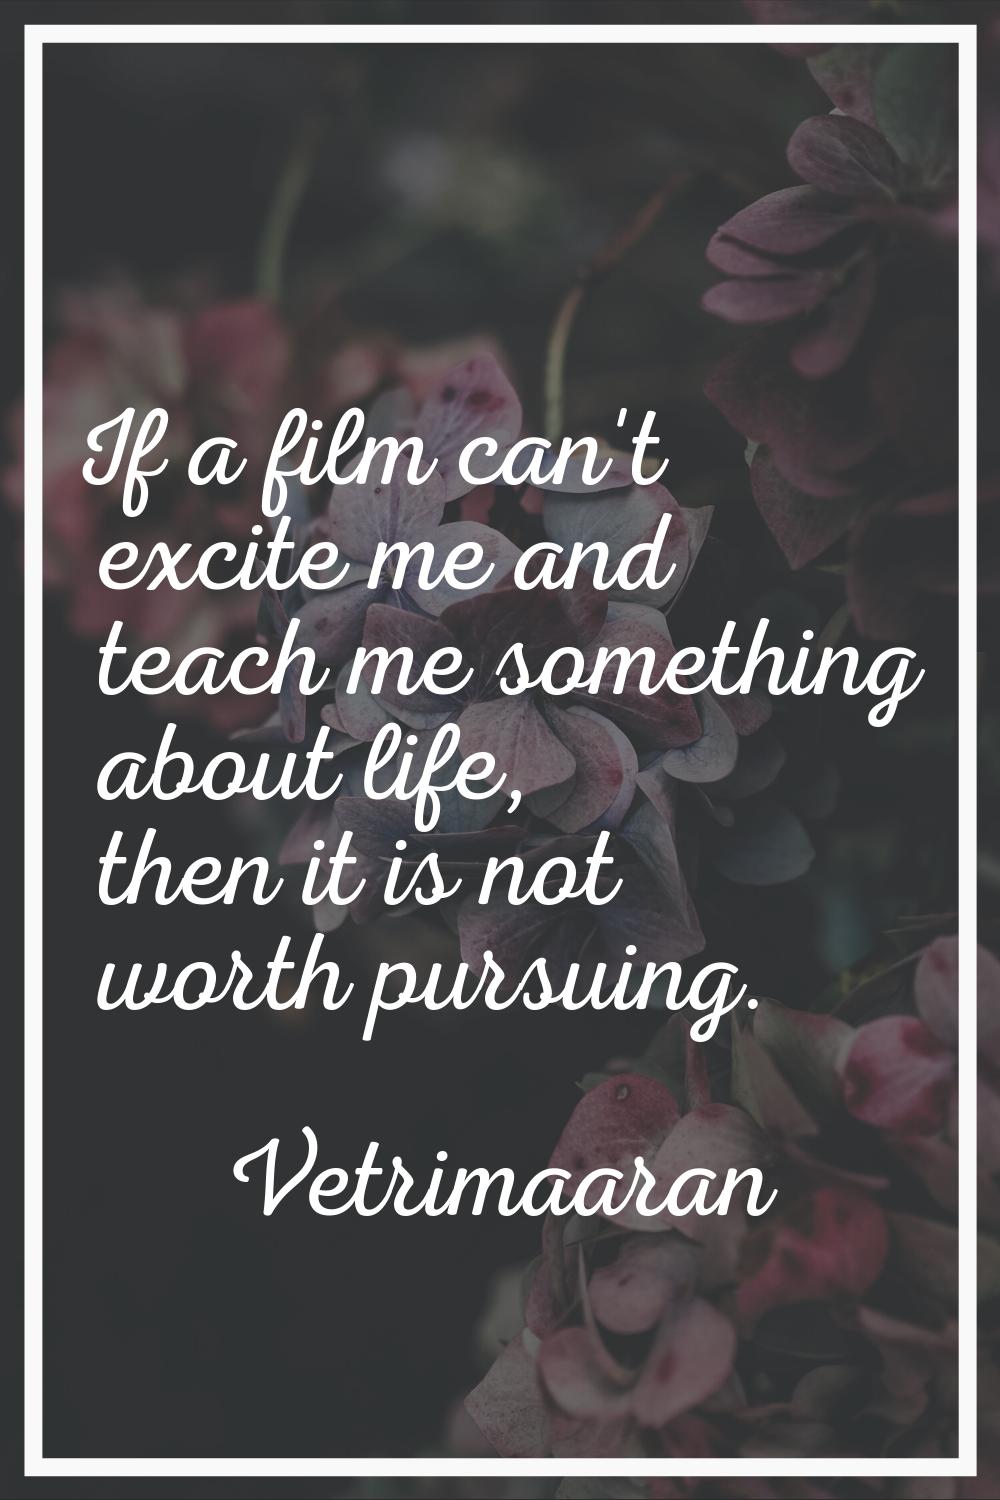 If a film can't excite me and teach me something about life, then it is not worth pursuing.